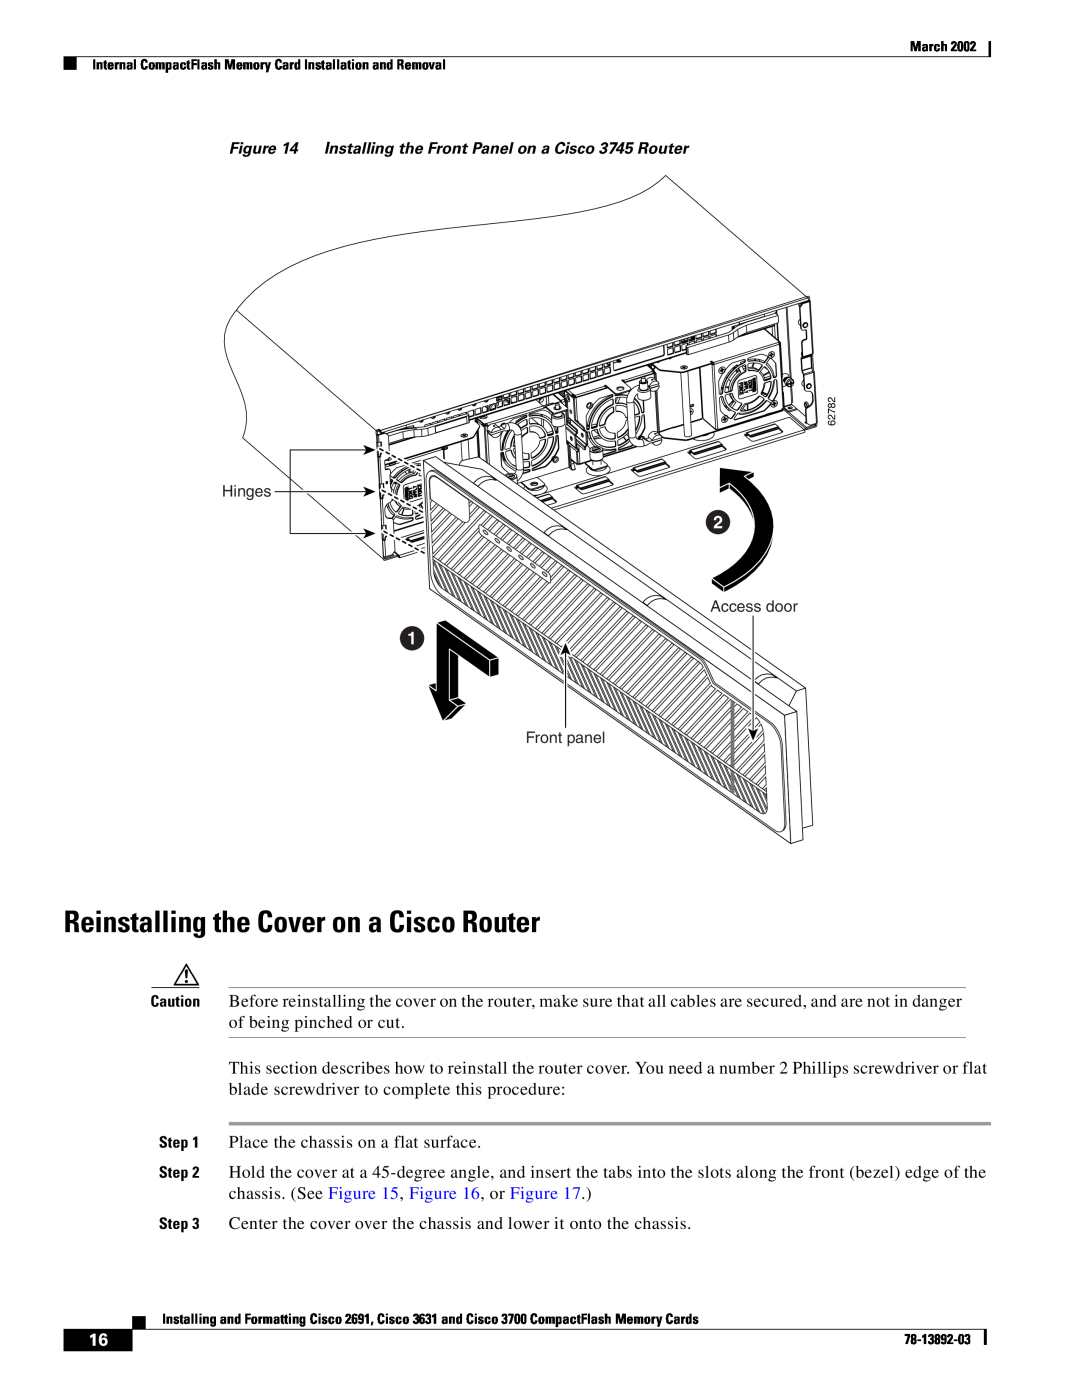 Cisco Systems 3631, 2691 manual Reinstalling the Cover on a Cisco Router, chassis. See , , or Figure 